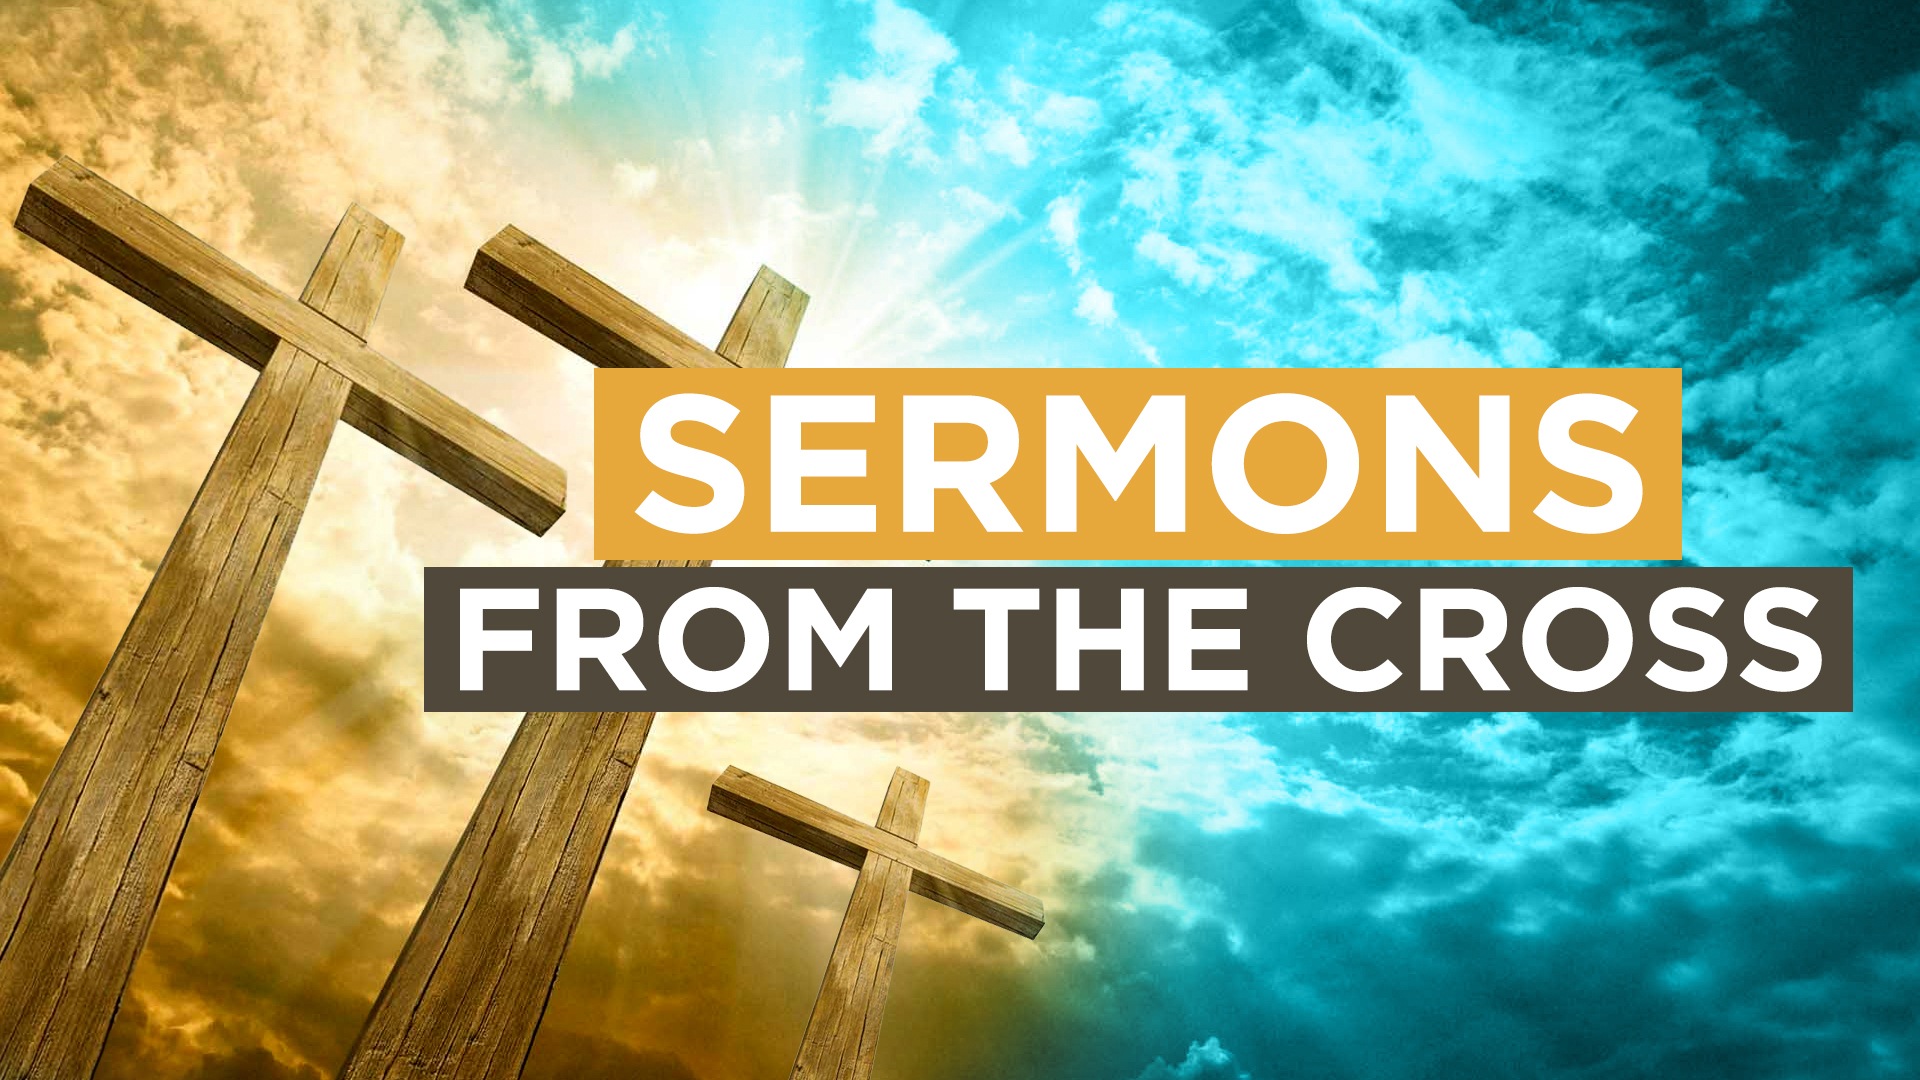 Easter Sermons - Sermons From The Cross